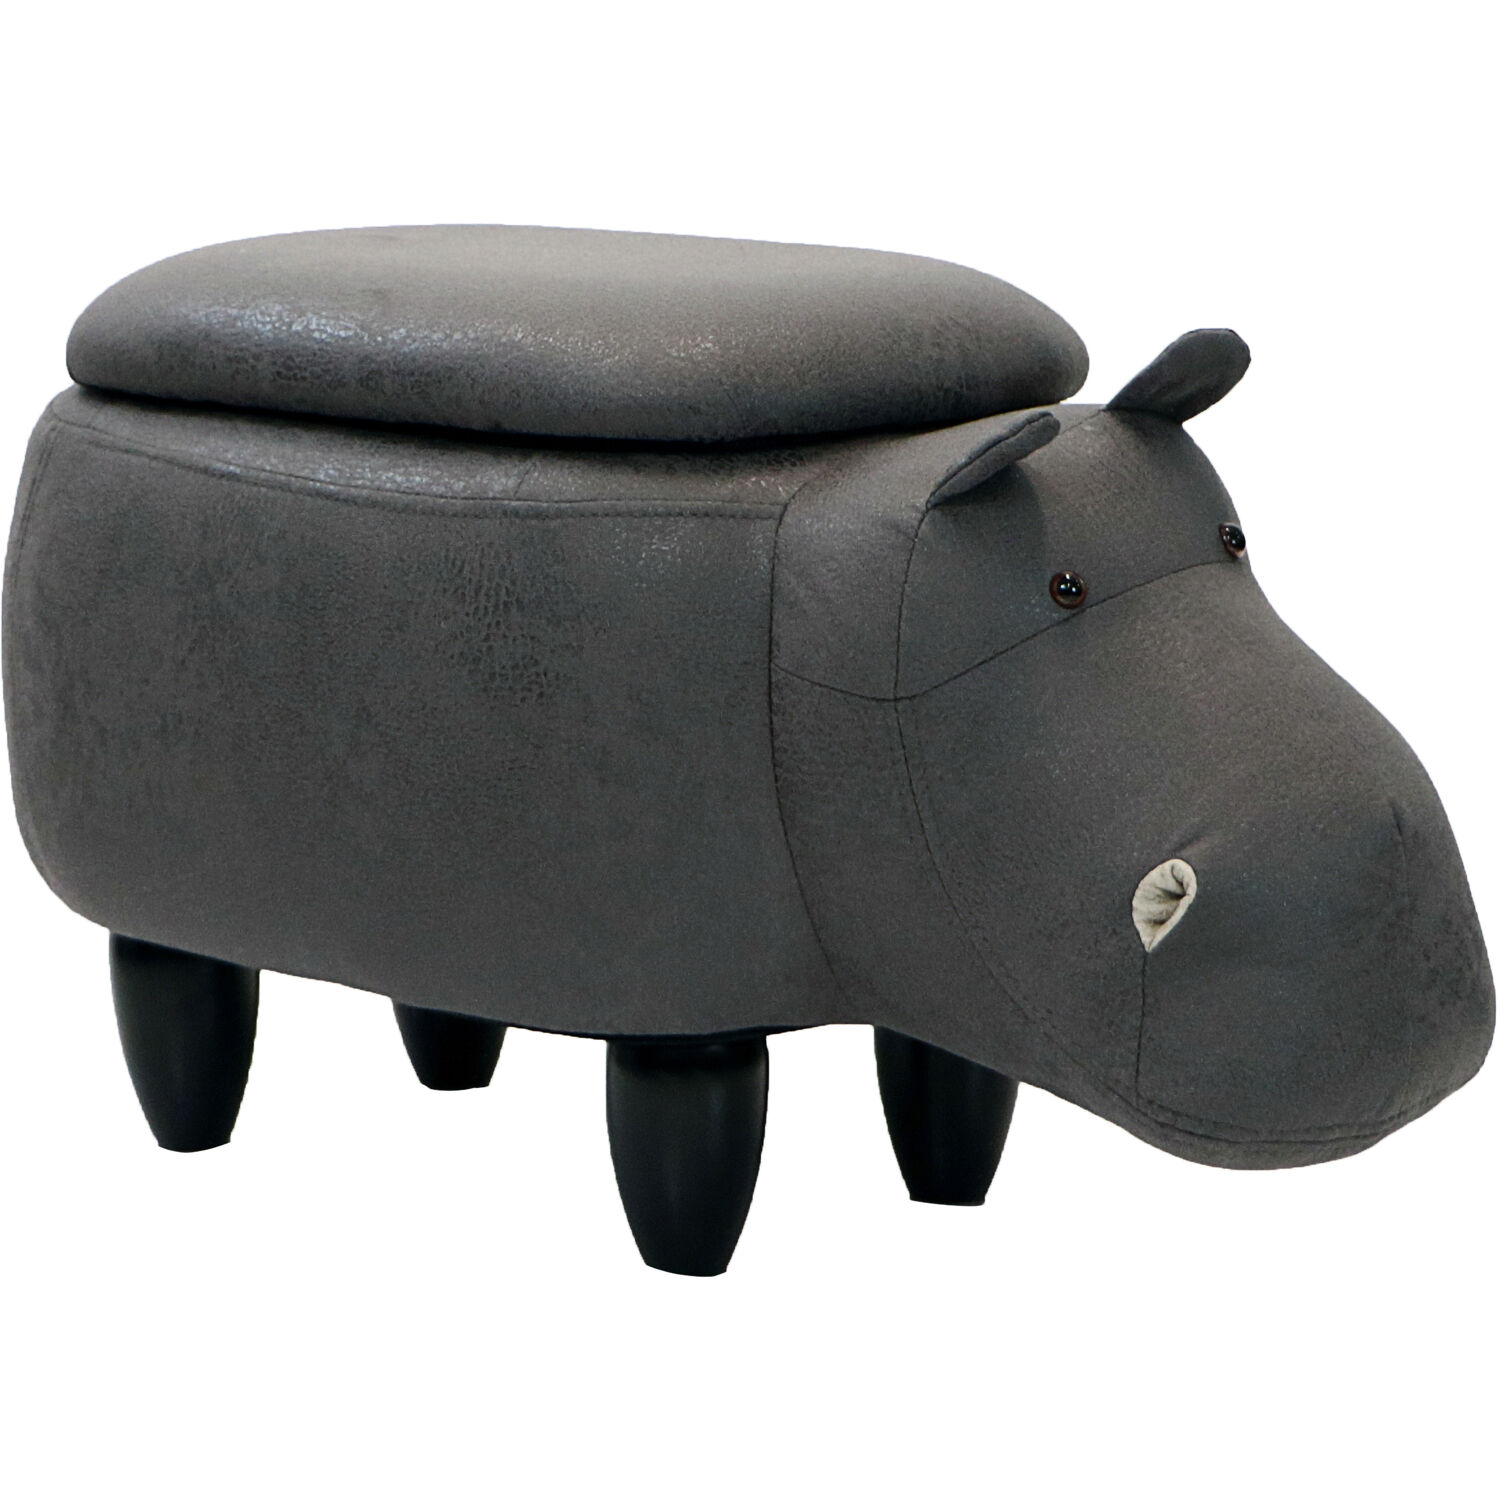 Critter Sitters 15-In. Seat Height Dark Gray Hippo Animal Shape Storage Ottoman - Furniture for Nursery, Bedroom, Playroom, and Living Room Decor - image 1 of 19